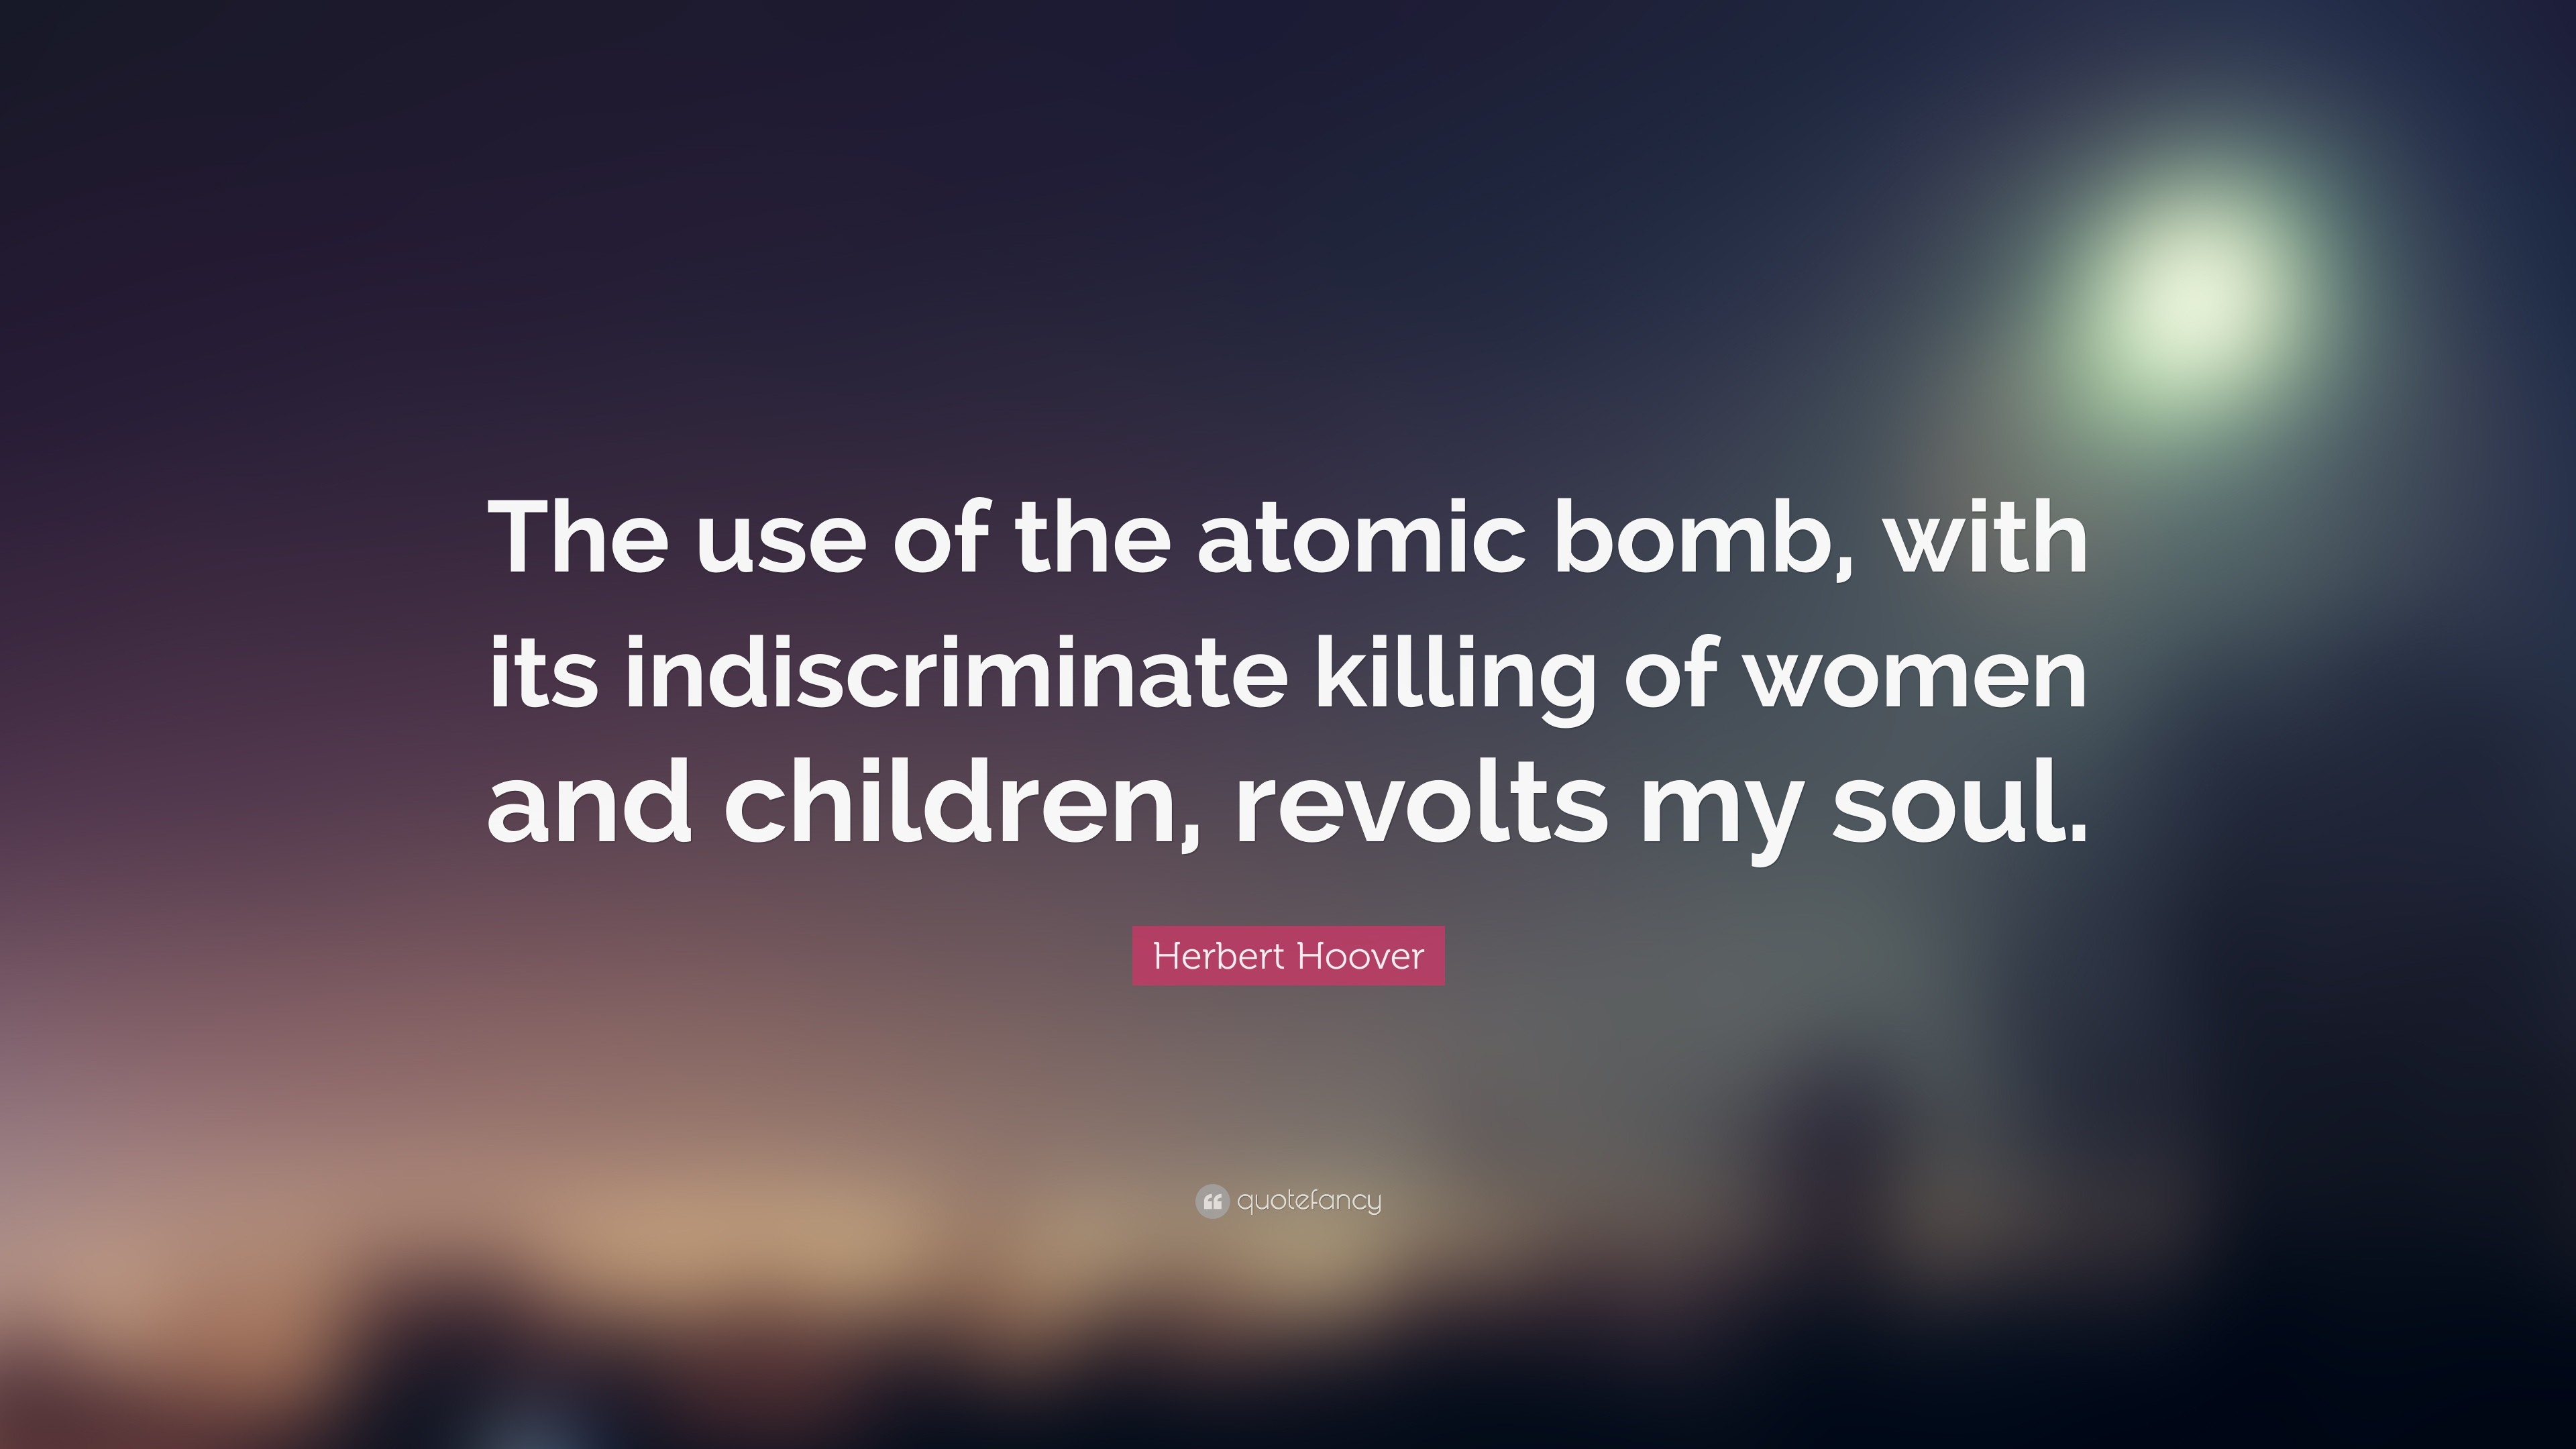 3840x2160 Herbert Hoover Quote: “The use of the atomic bomb, with its indiscriminate  killing